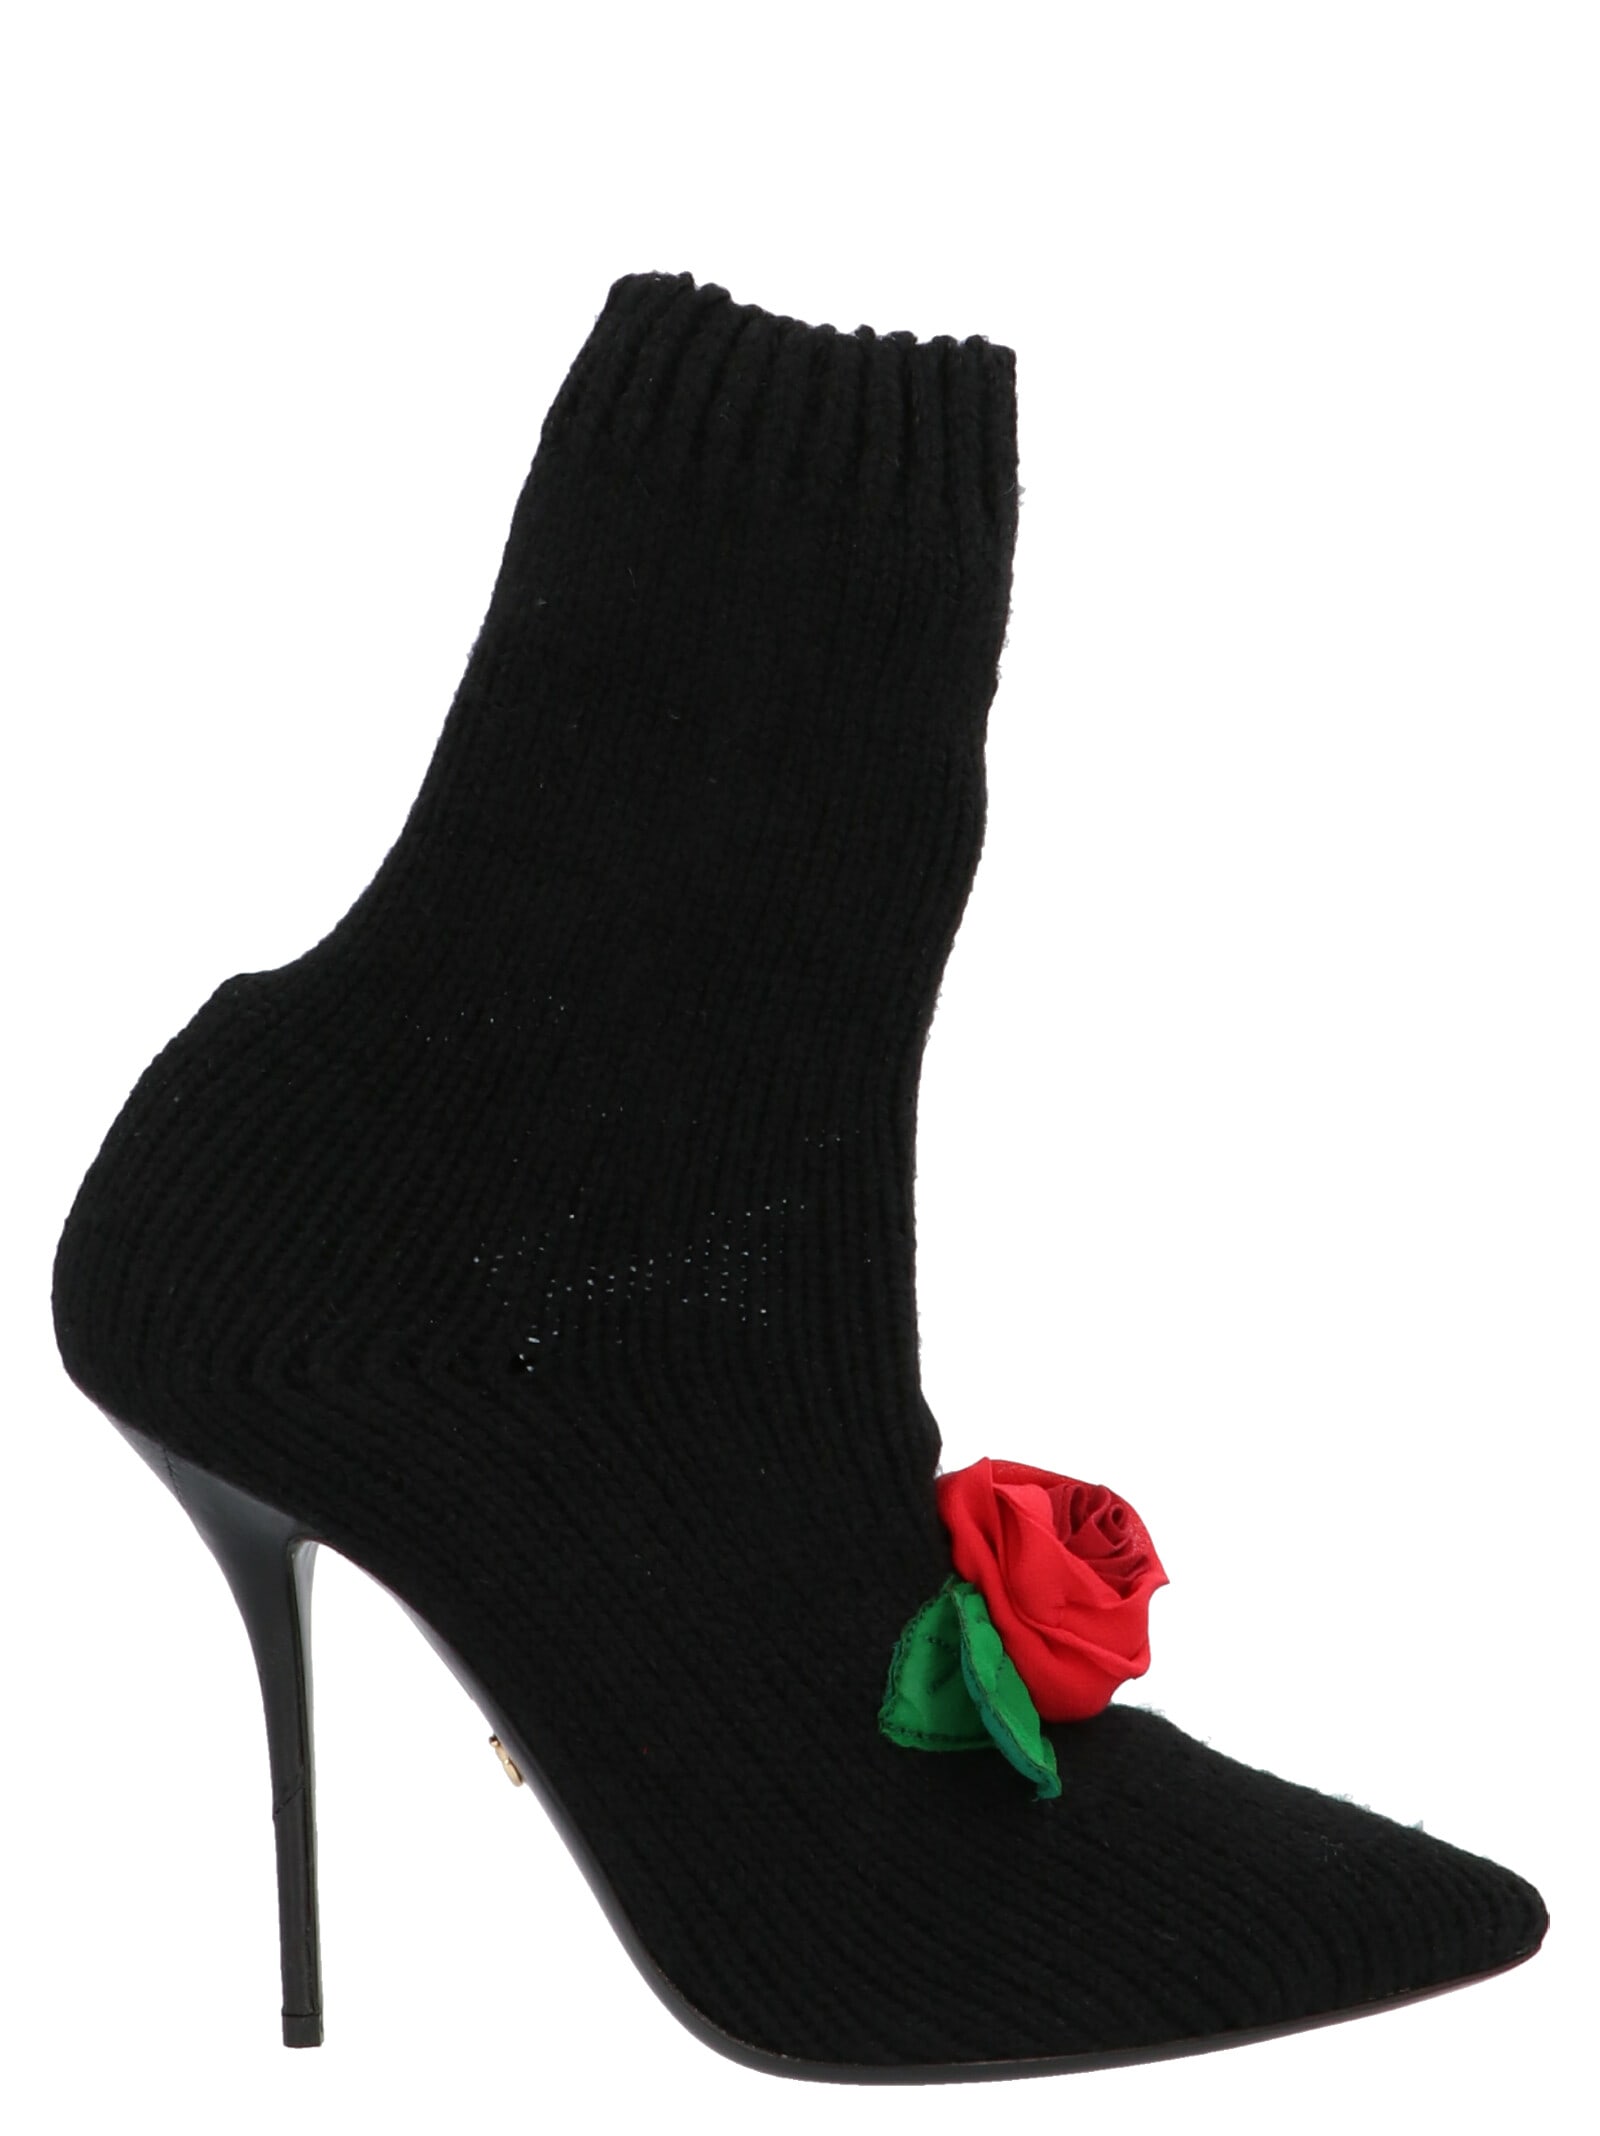 Buy Dolce & Gabbana nkit Shoes online, shop Dolce & Gabbana shoes with free shipping